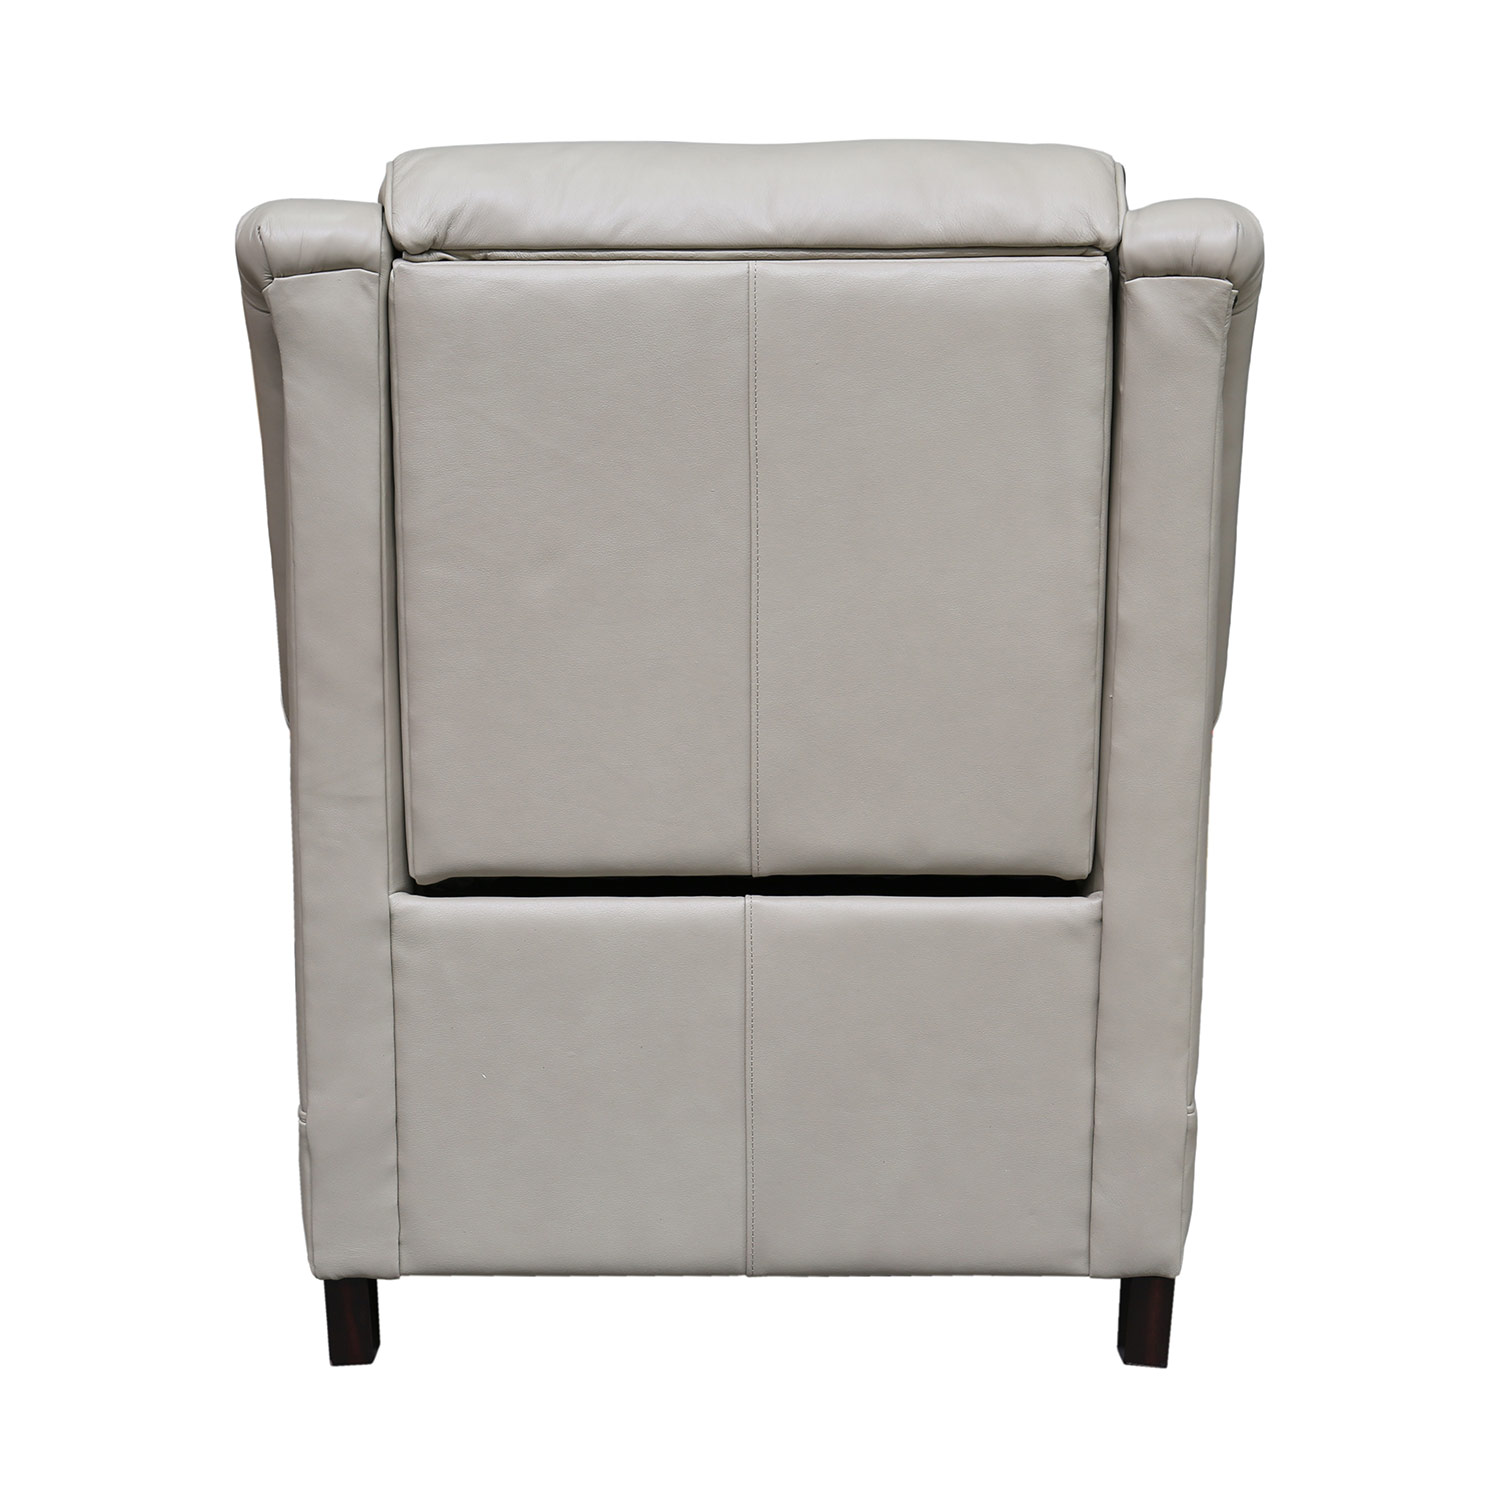 Barcalounger Warrendale Power Recliner Chair with Power Head Rest - Shoreham Cream/All Leather